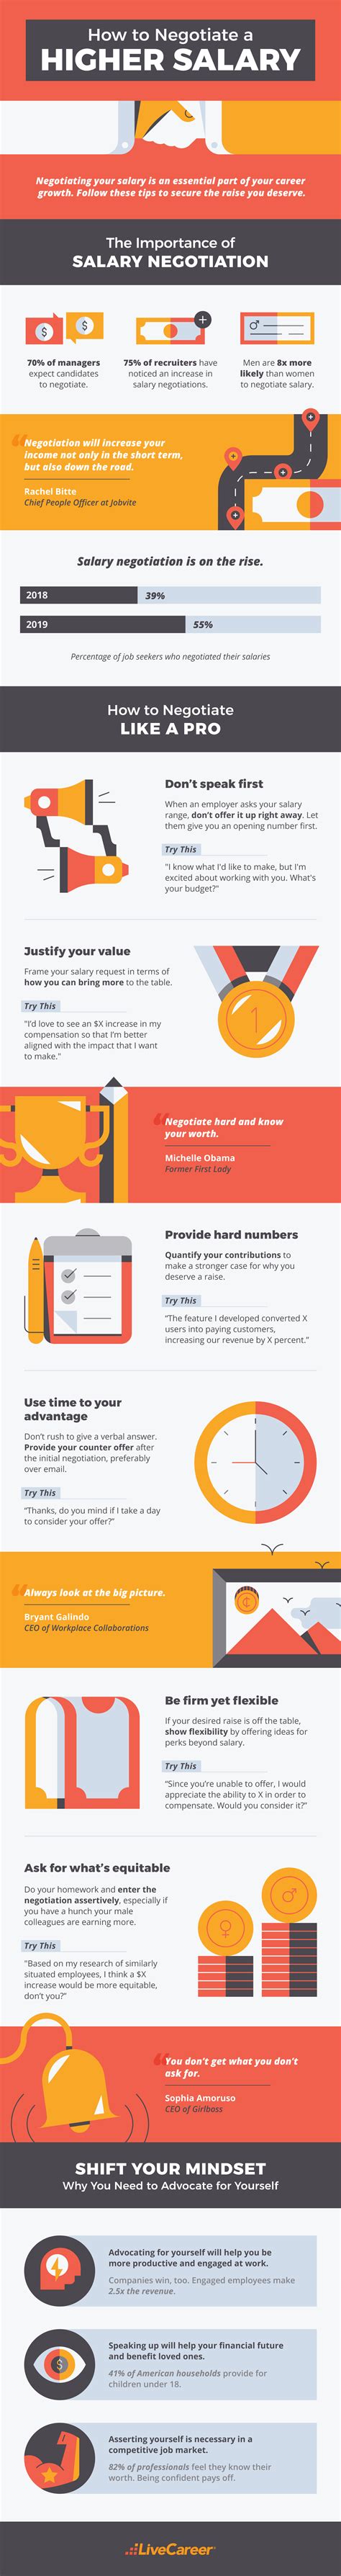 [Infographic] How to negotiate a higher salary - Margaret Buj ...